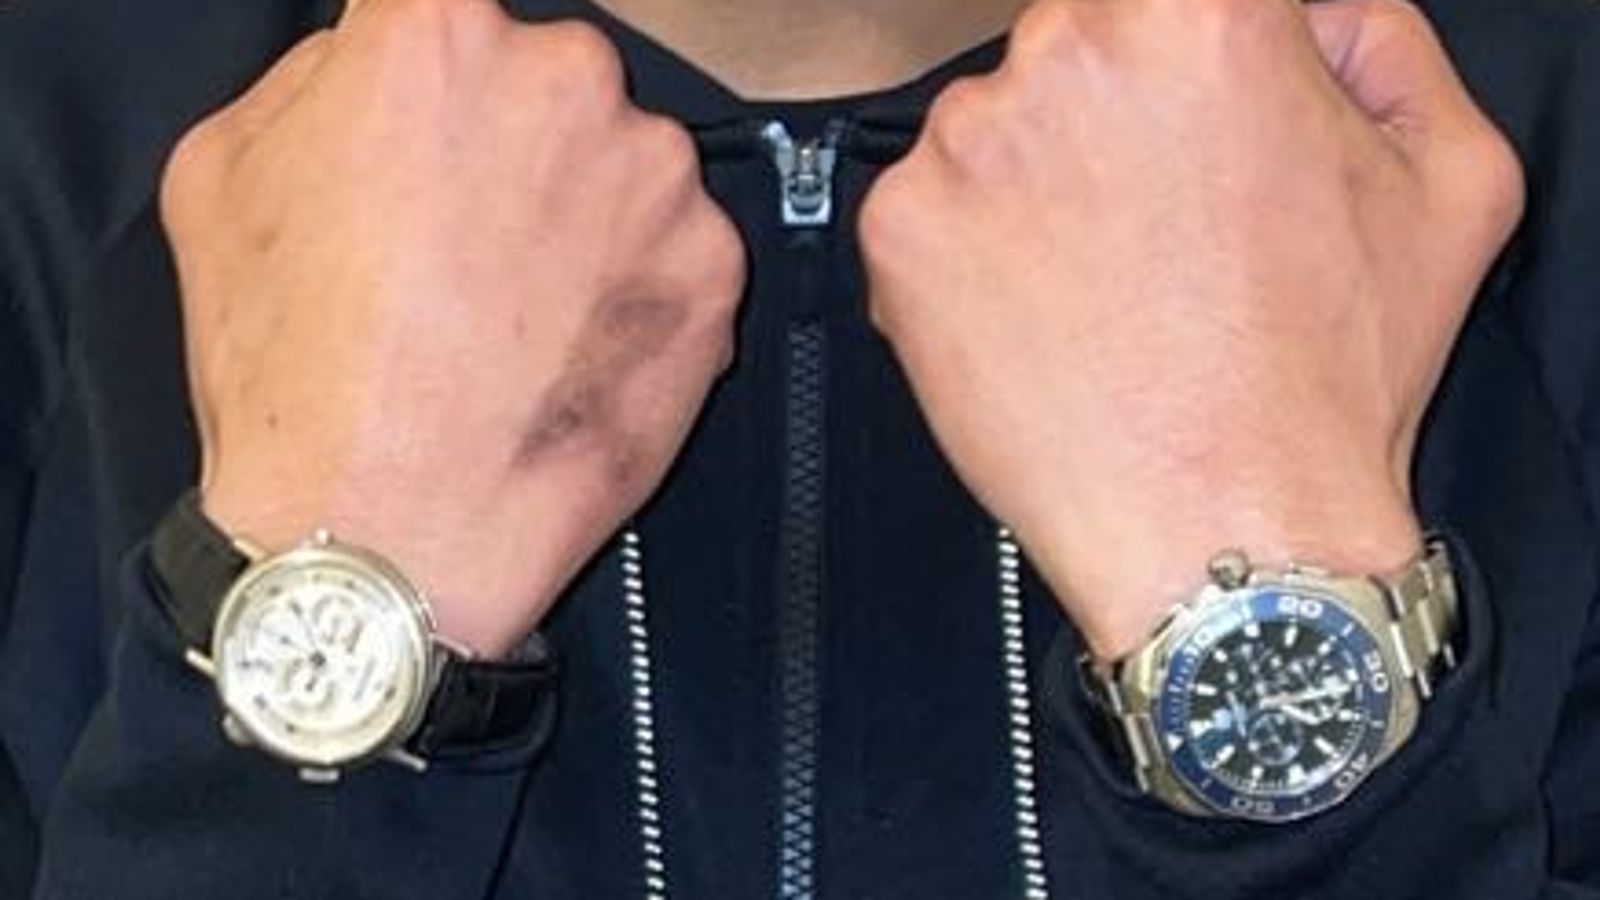 Disturbing Video Shows Just How Bad Watch Thefts Have Become In London